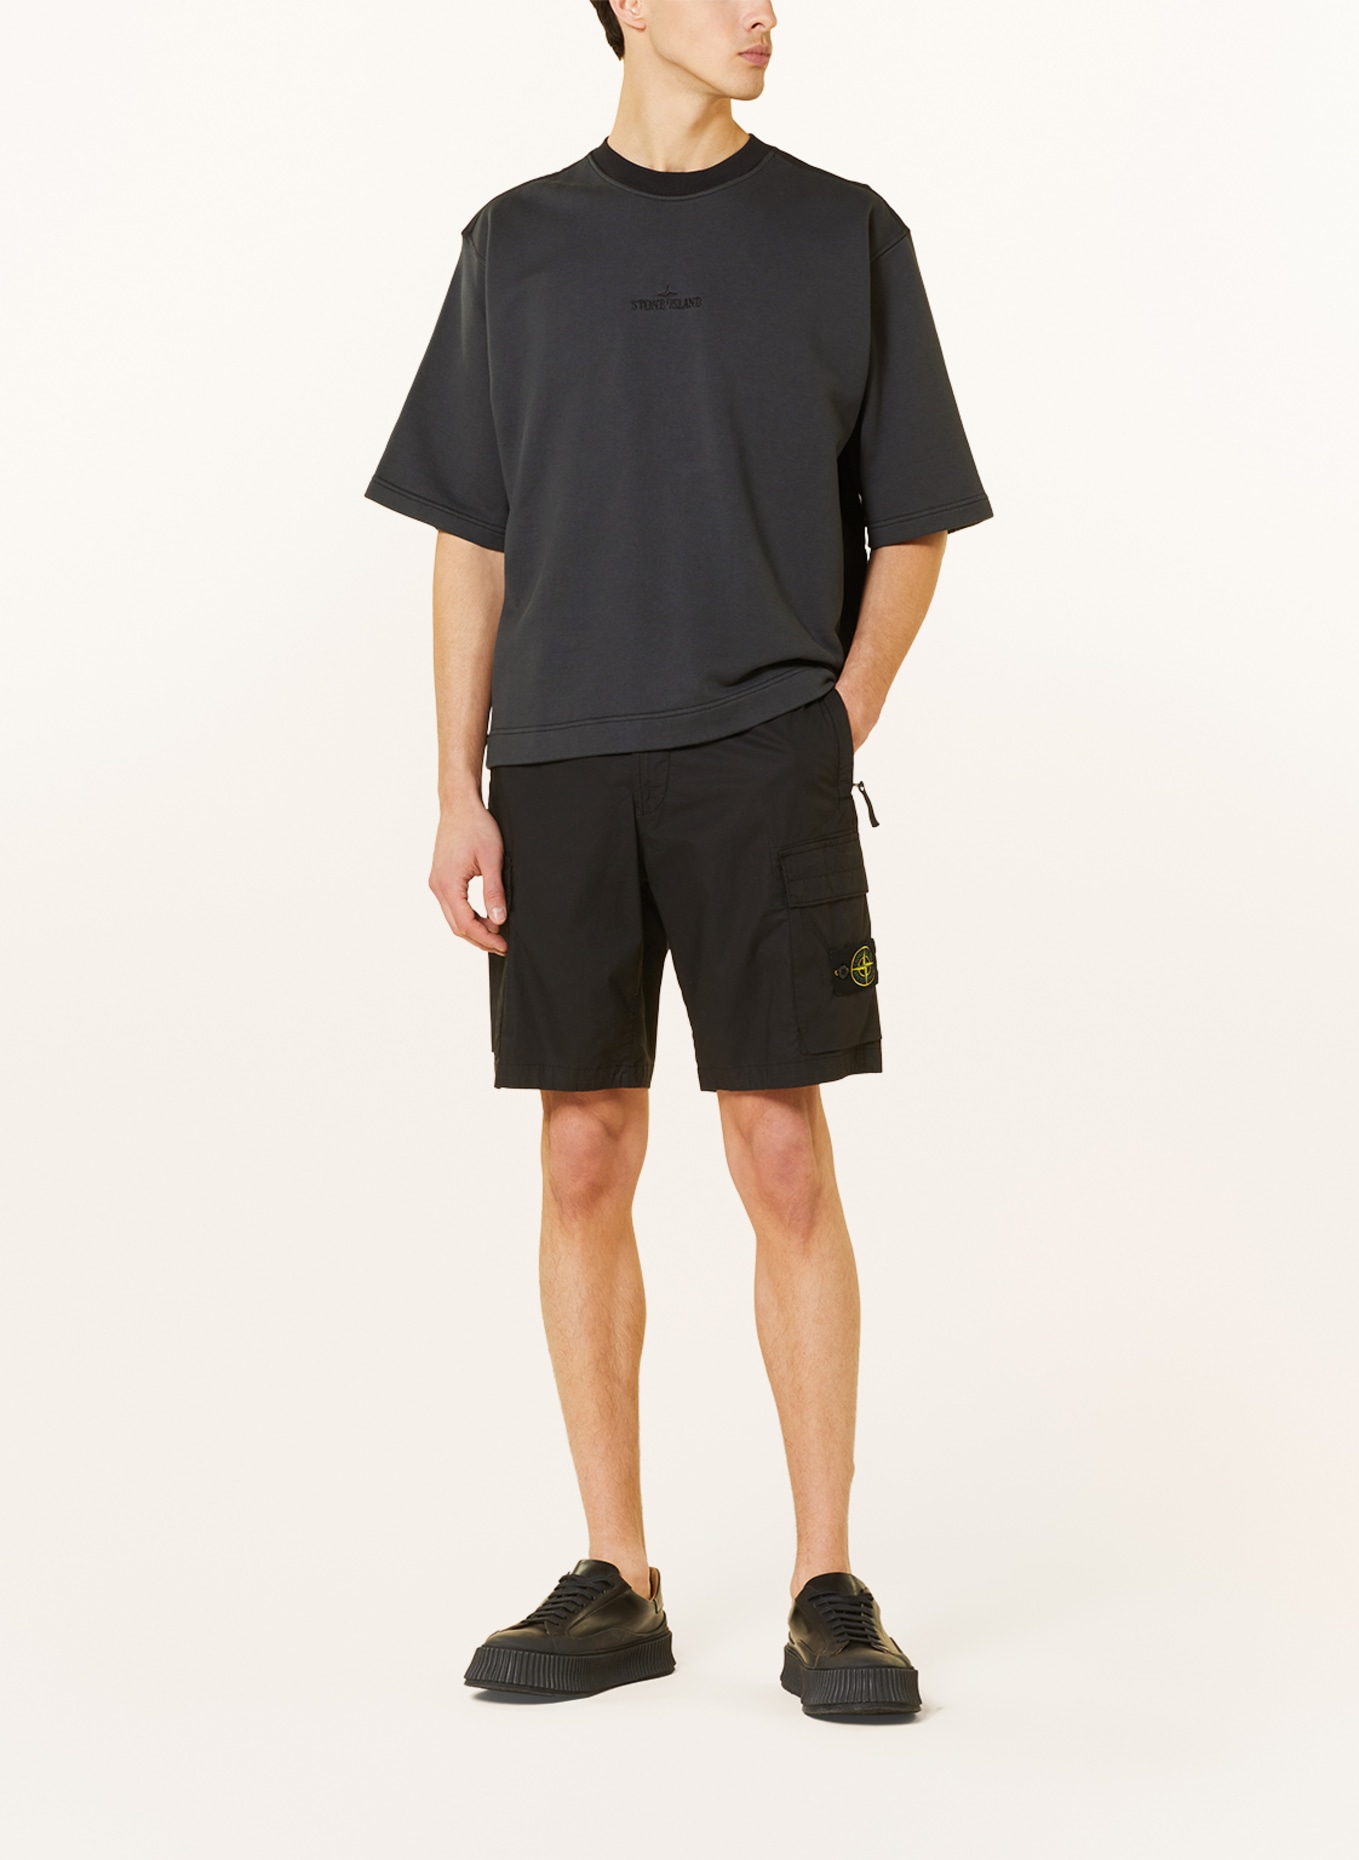 STONE ISLAND T-shirt in mixed materials, Color: DARK GRAY (Image 2)